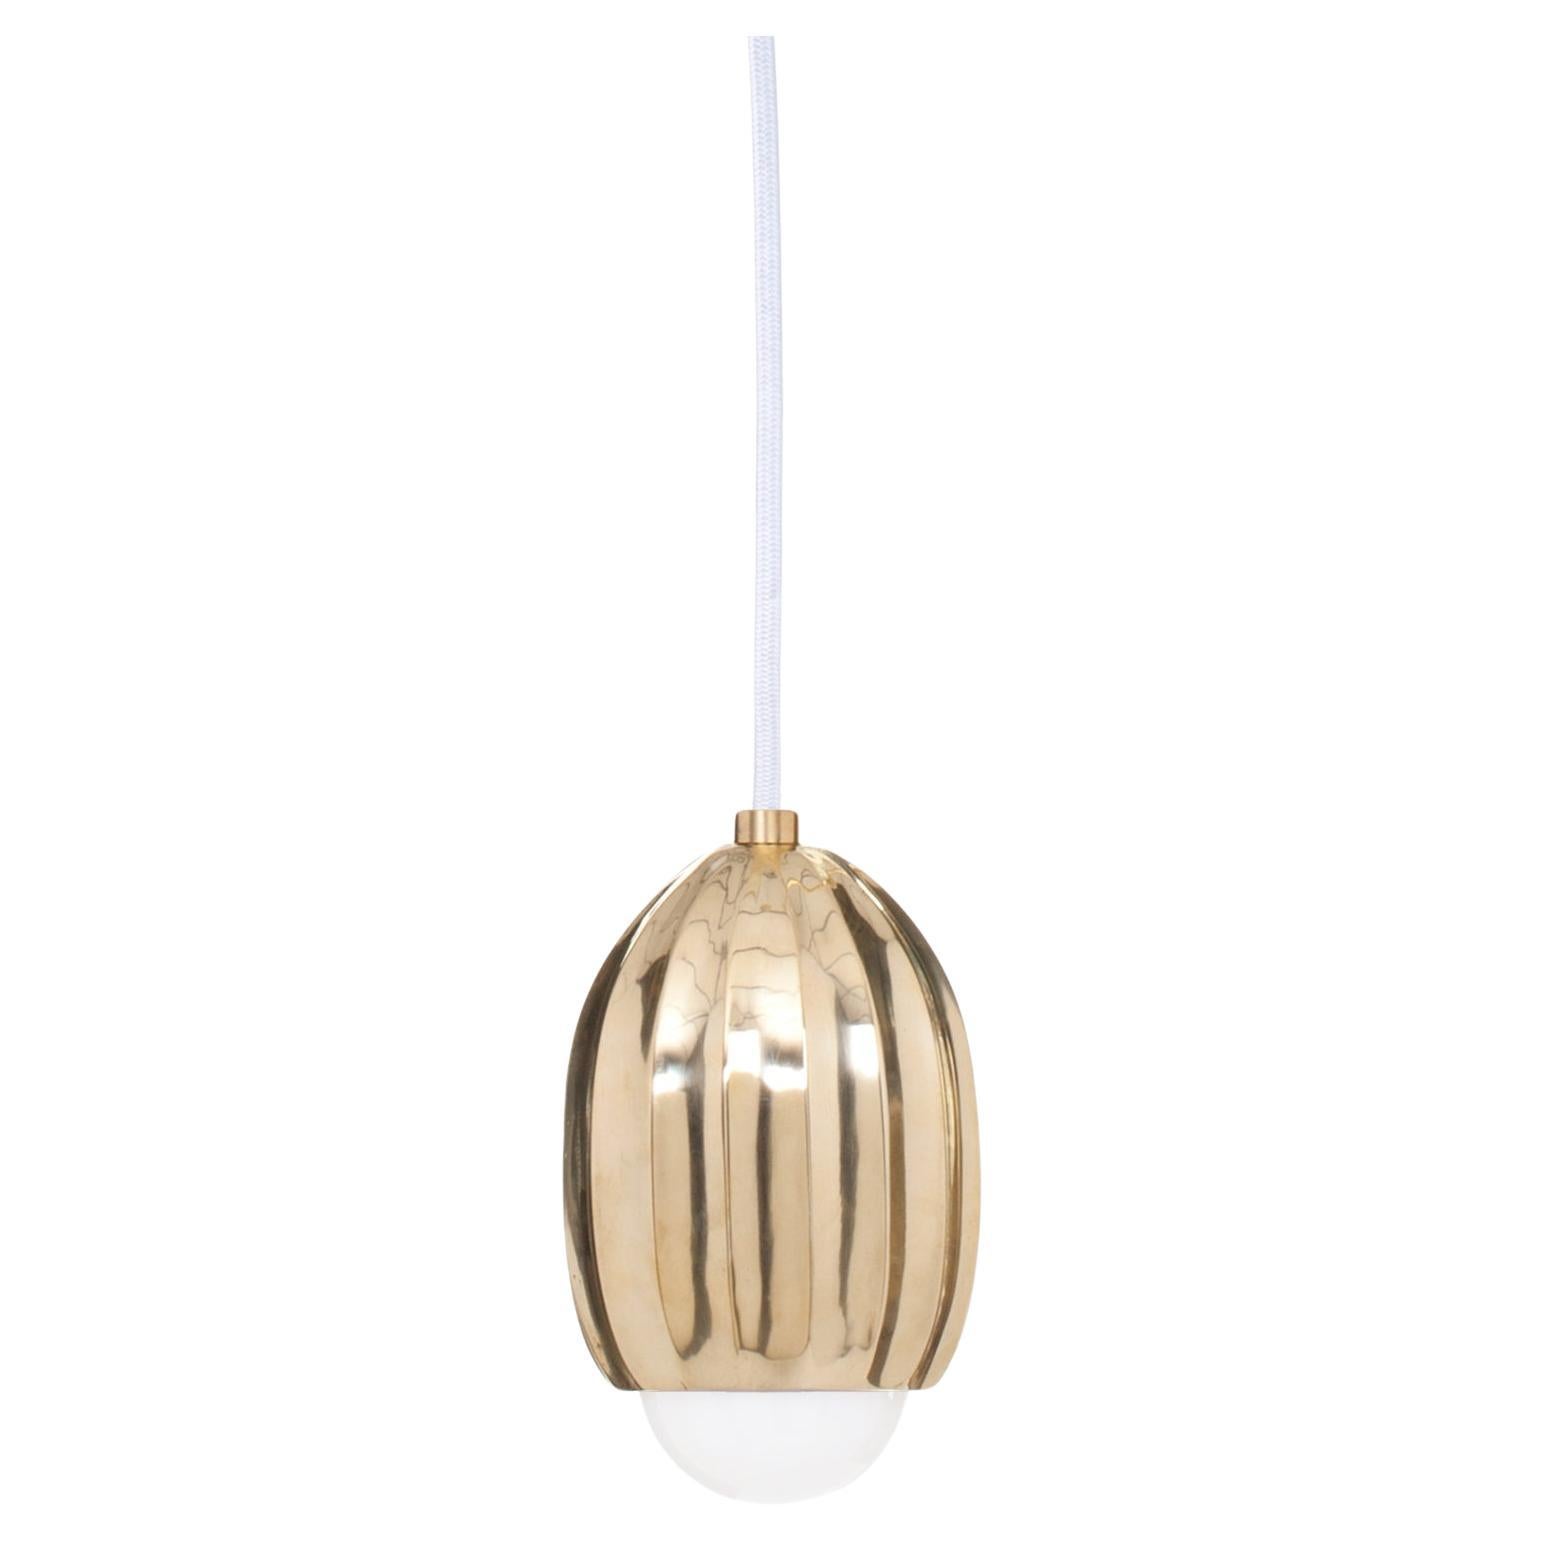 Poppy Polished Brass Pendant Lamp by Fred and Juul